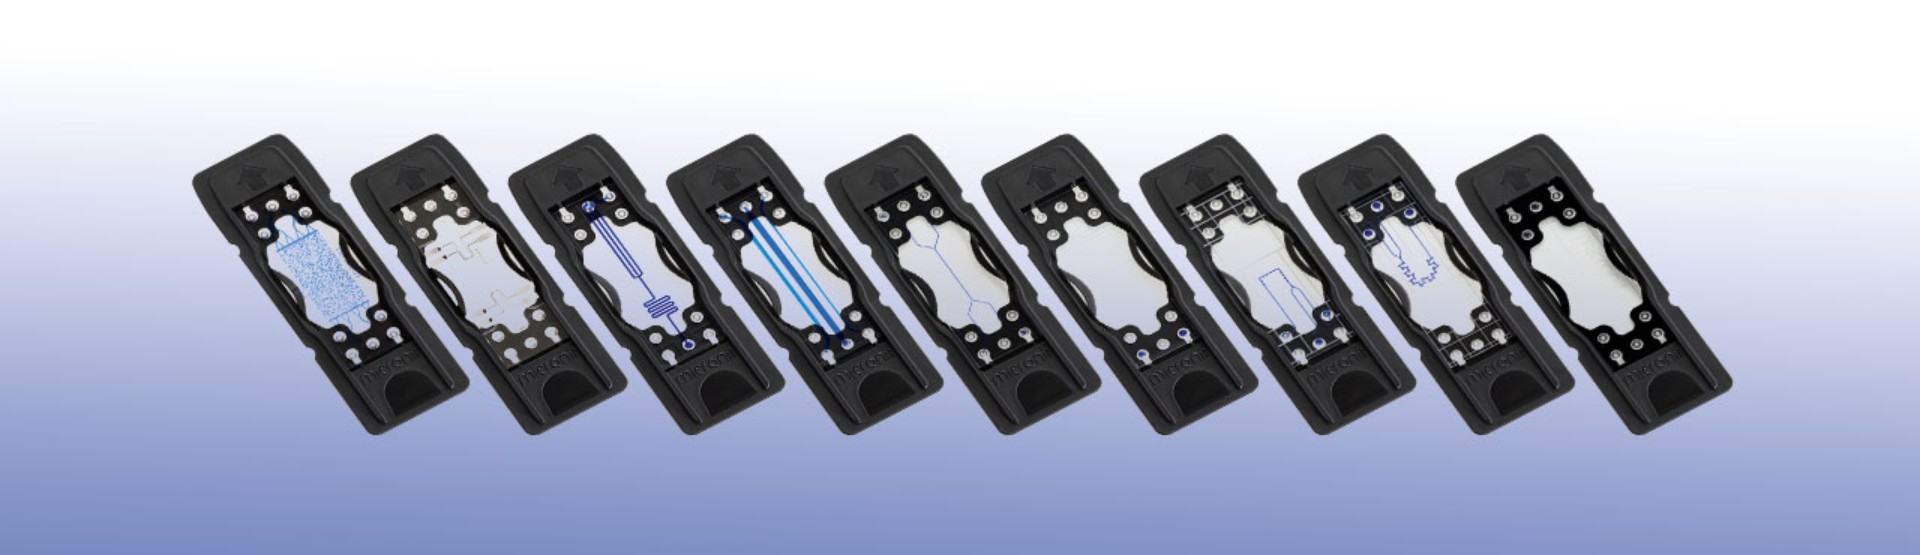 Selection of microfluidic chips available in Micronit's web store